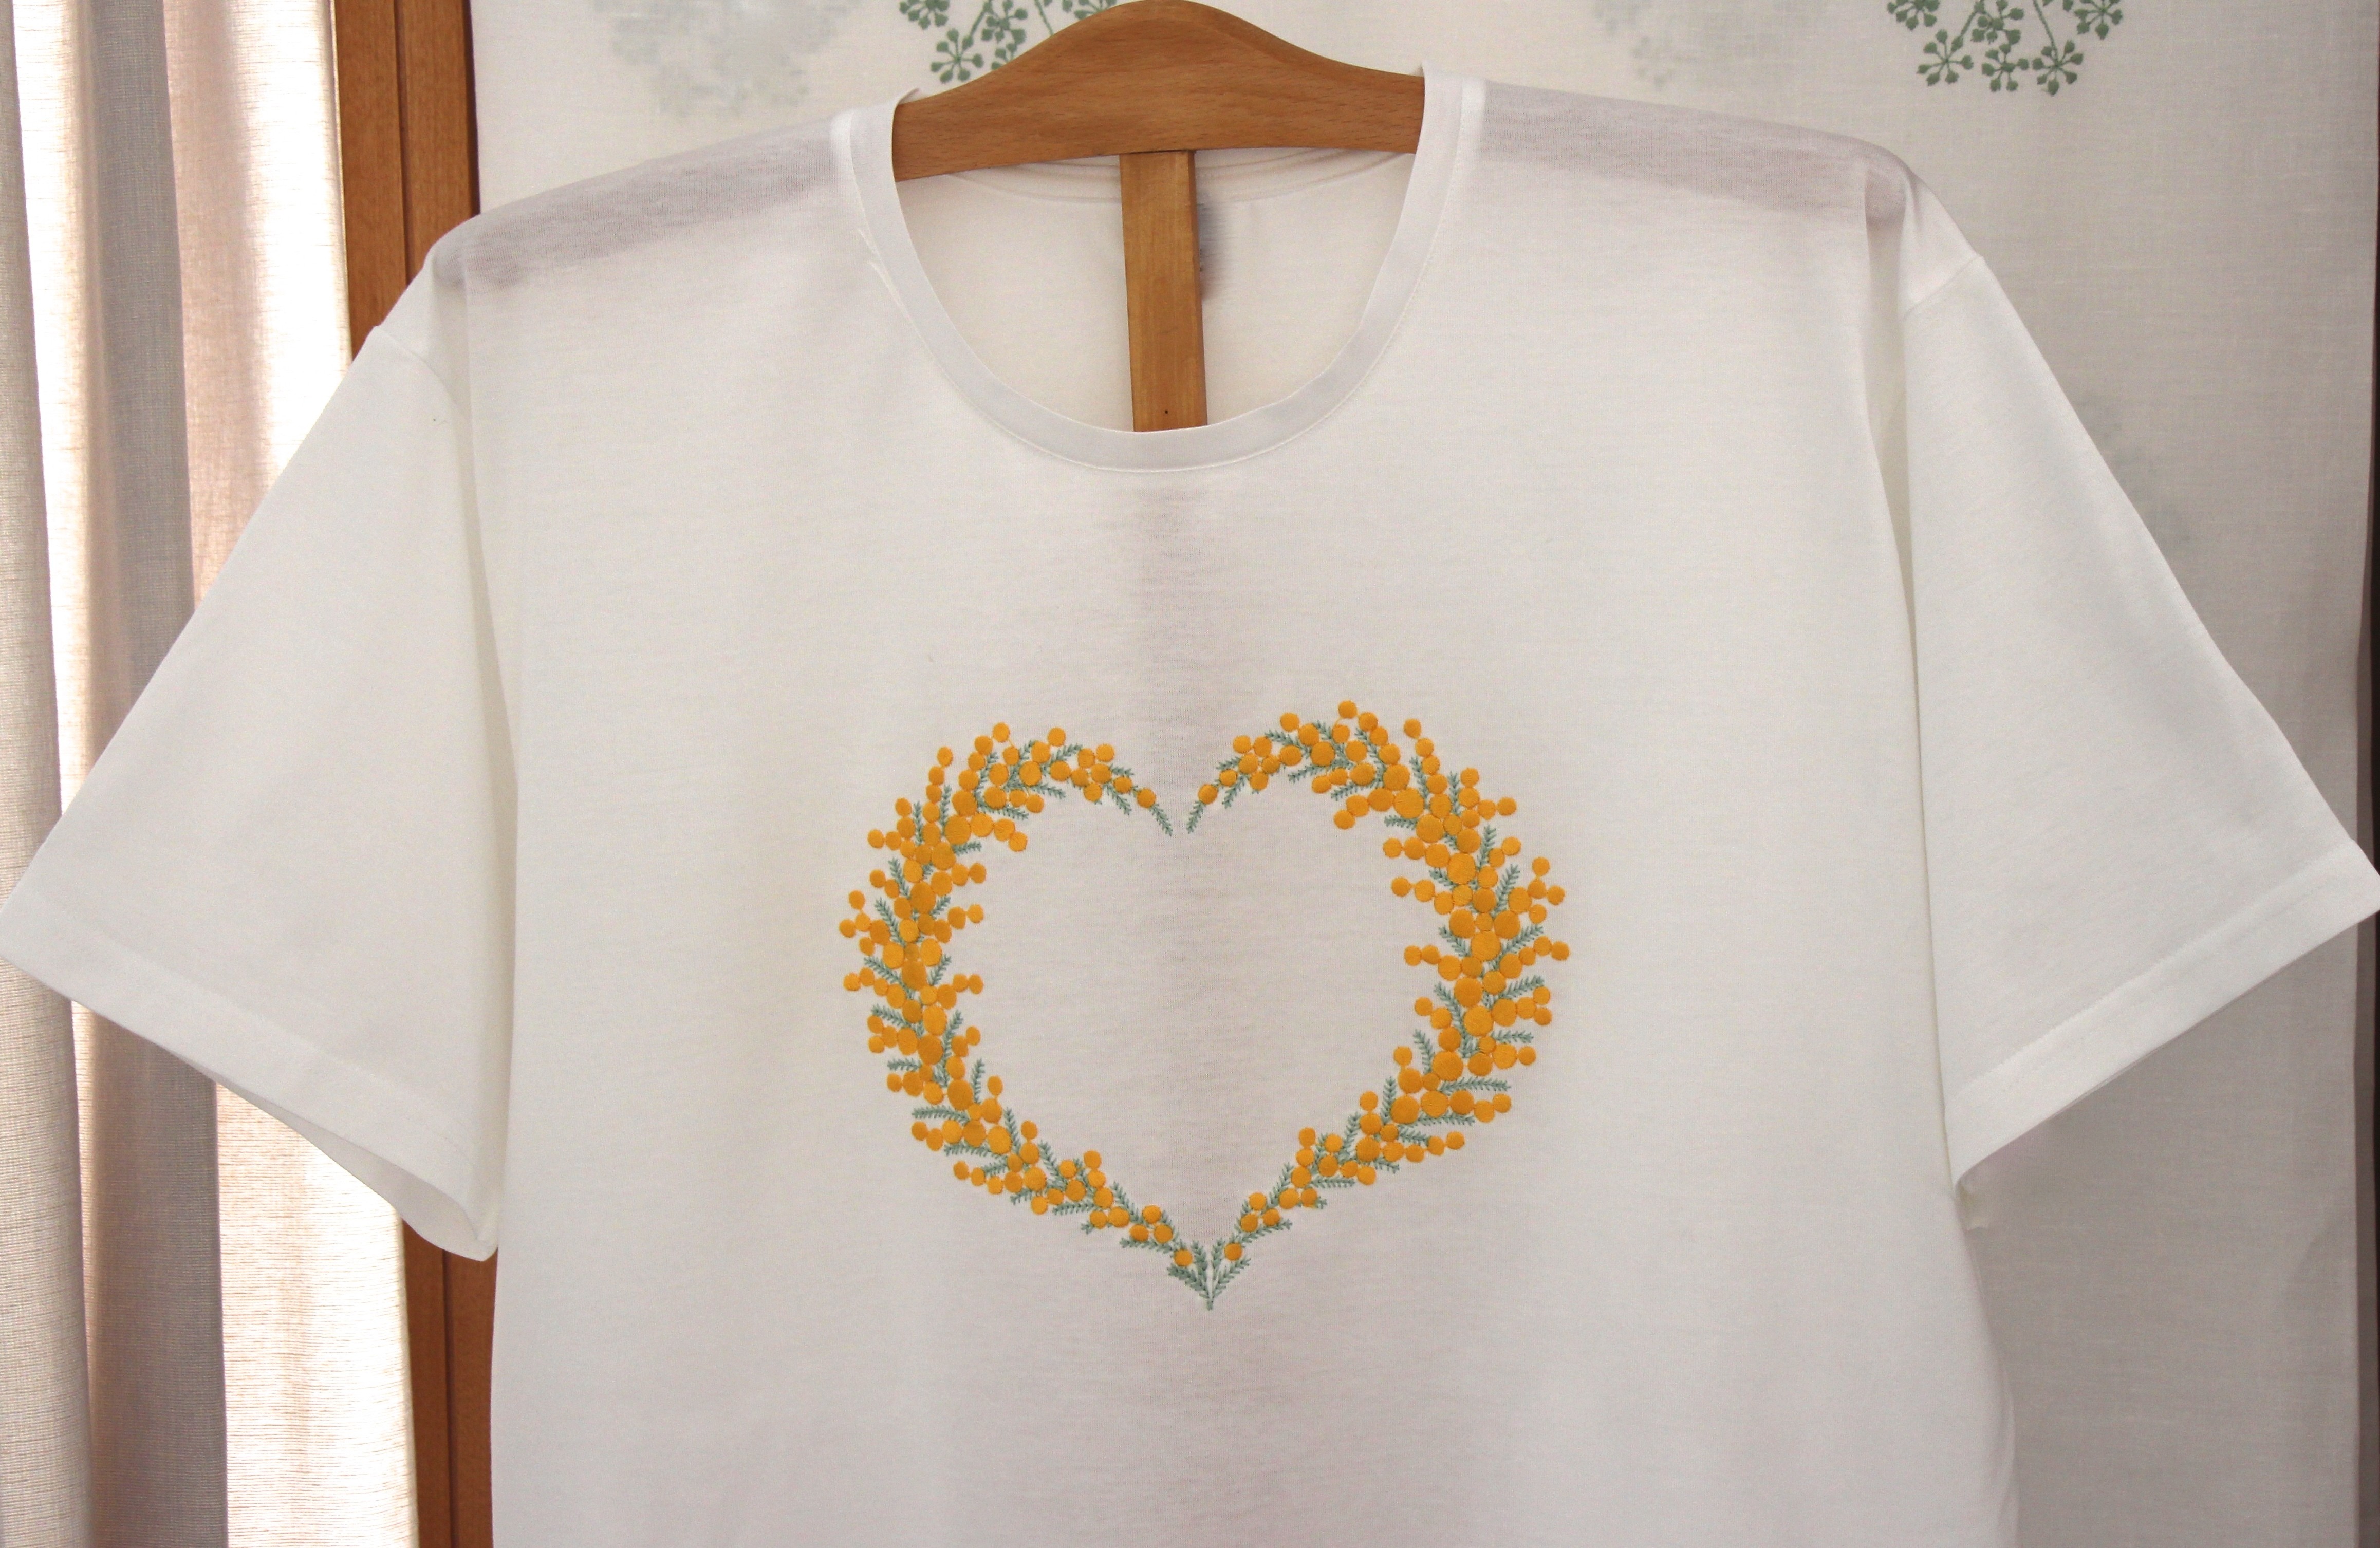 "Coeur de mimosa" embroidered night t-shirt